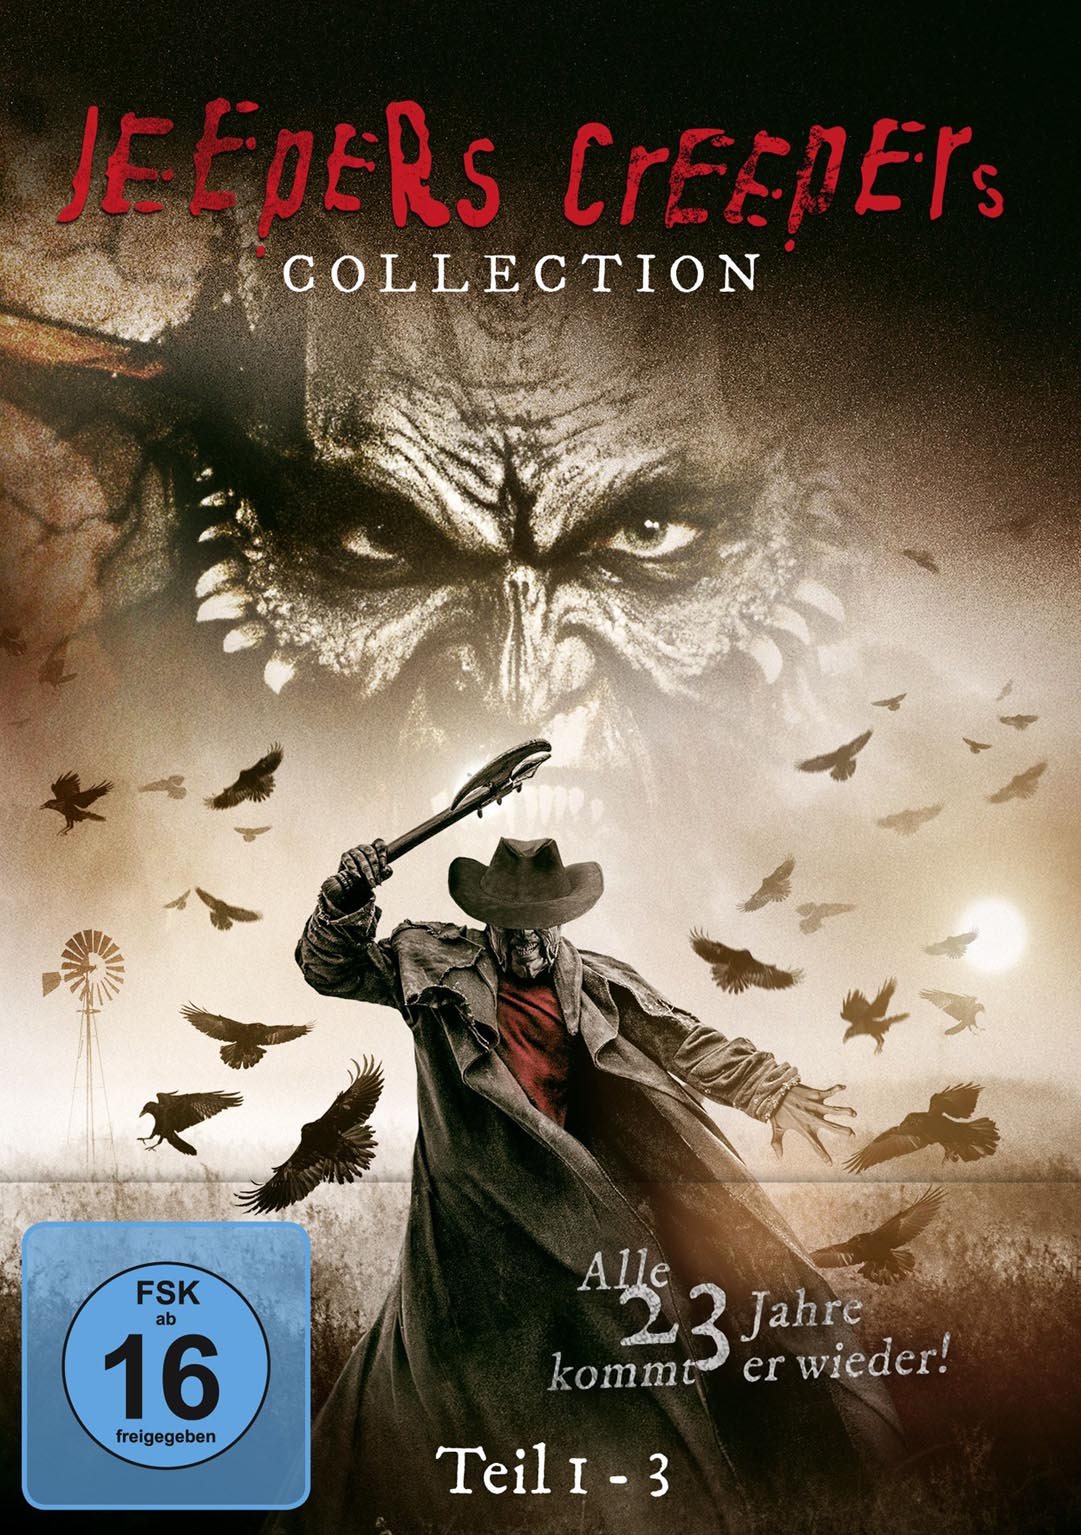 Libro_Jeepers Creepers Collection DVD_€ 19,99